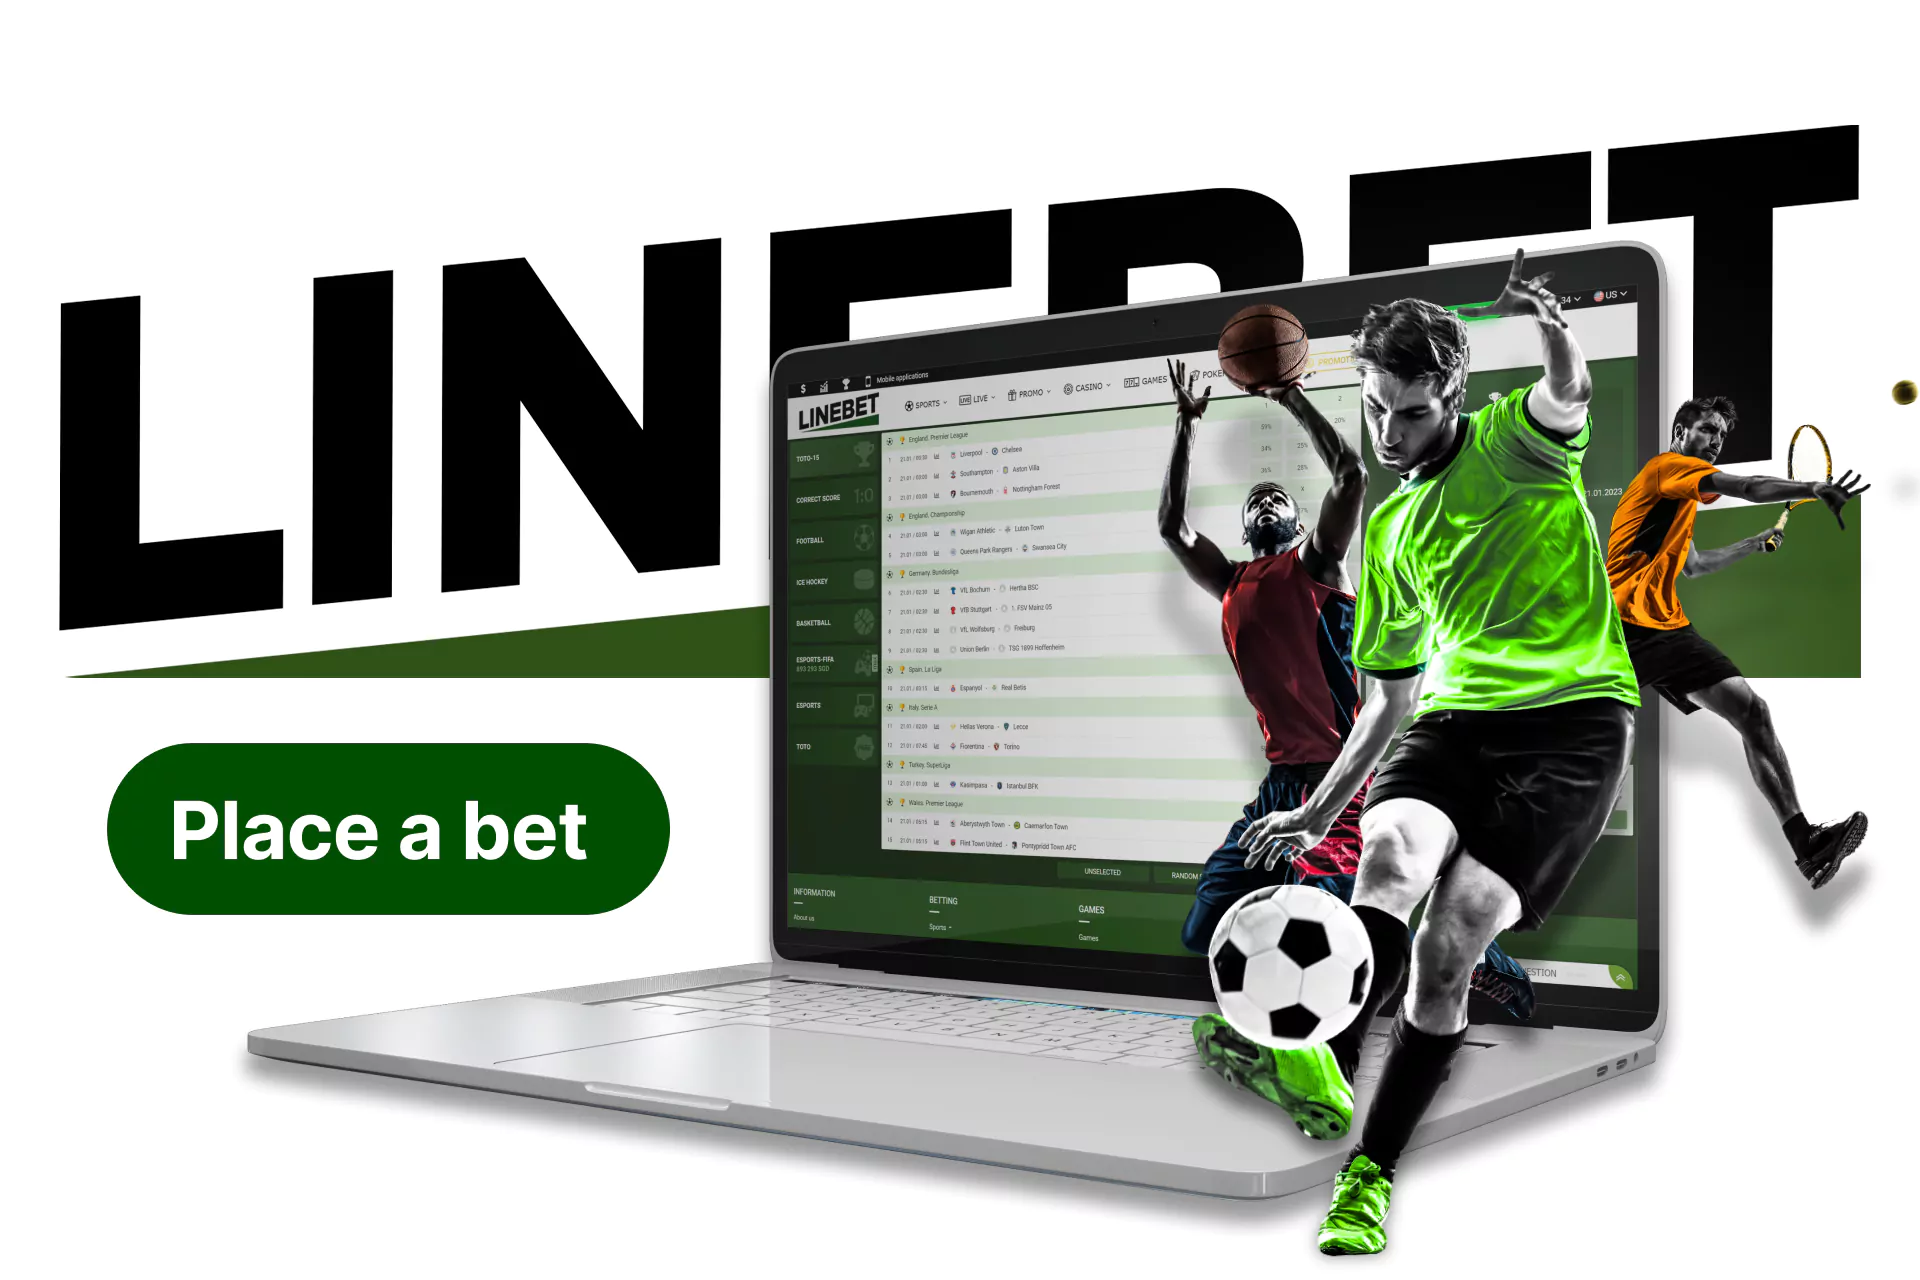 With Linebet, start playing TOTO quickly and easily.